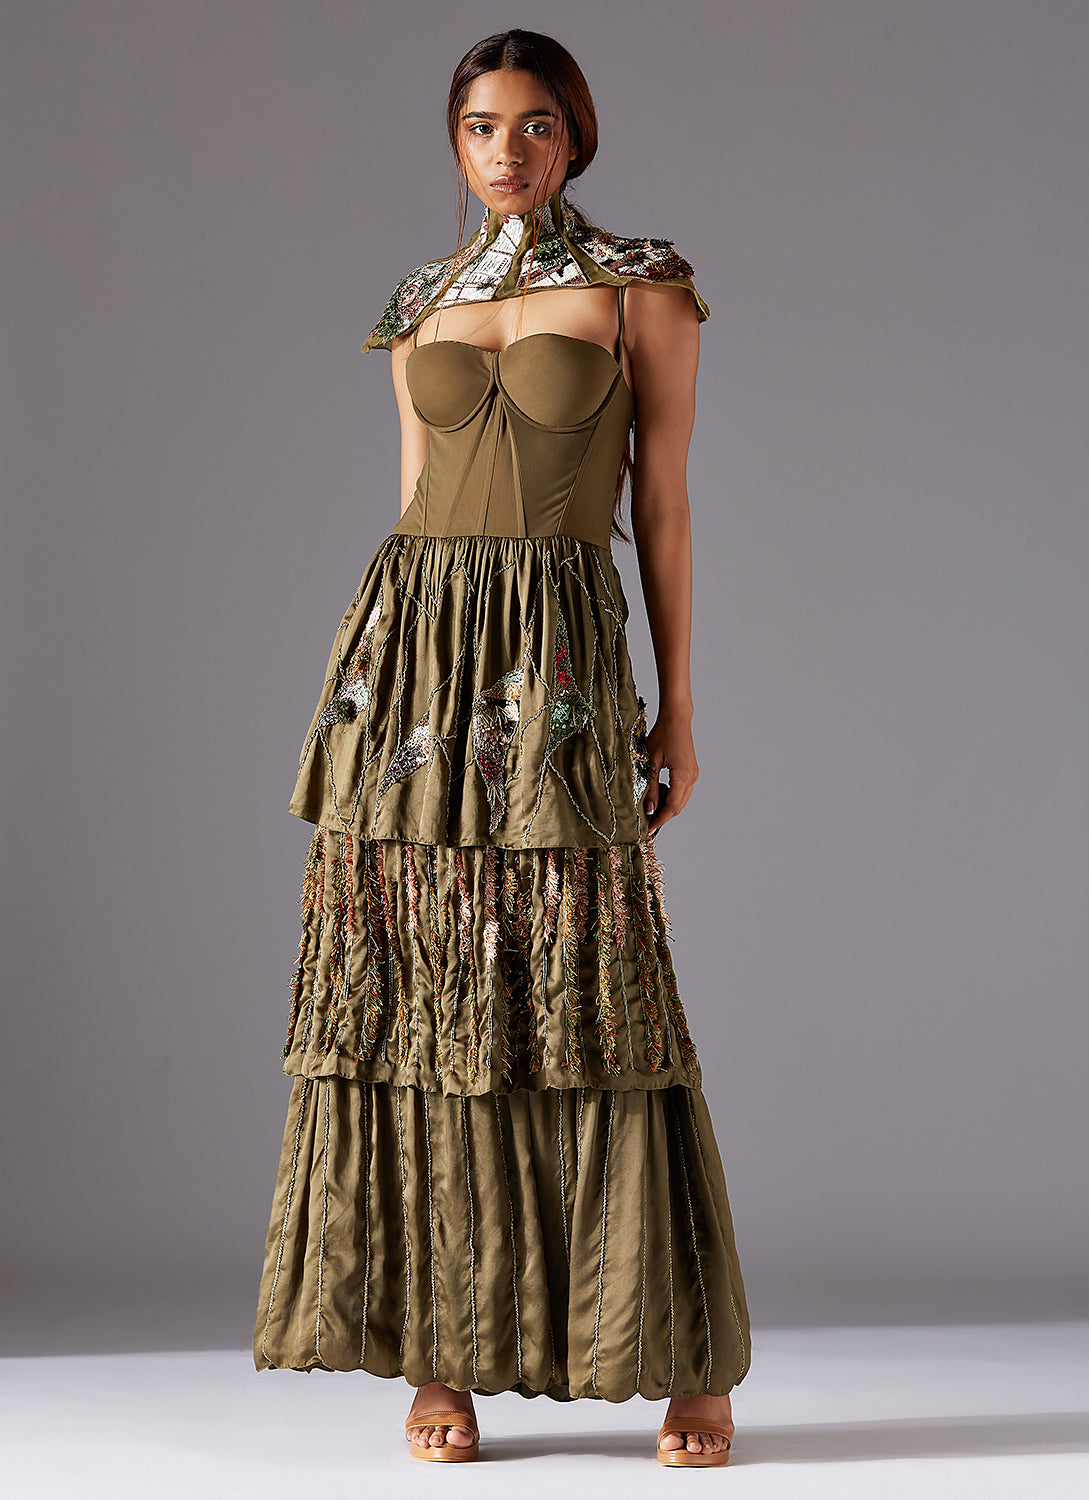 Topiary Corset Gown with Puzzle Shoulder Sash